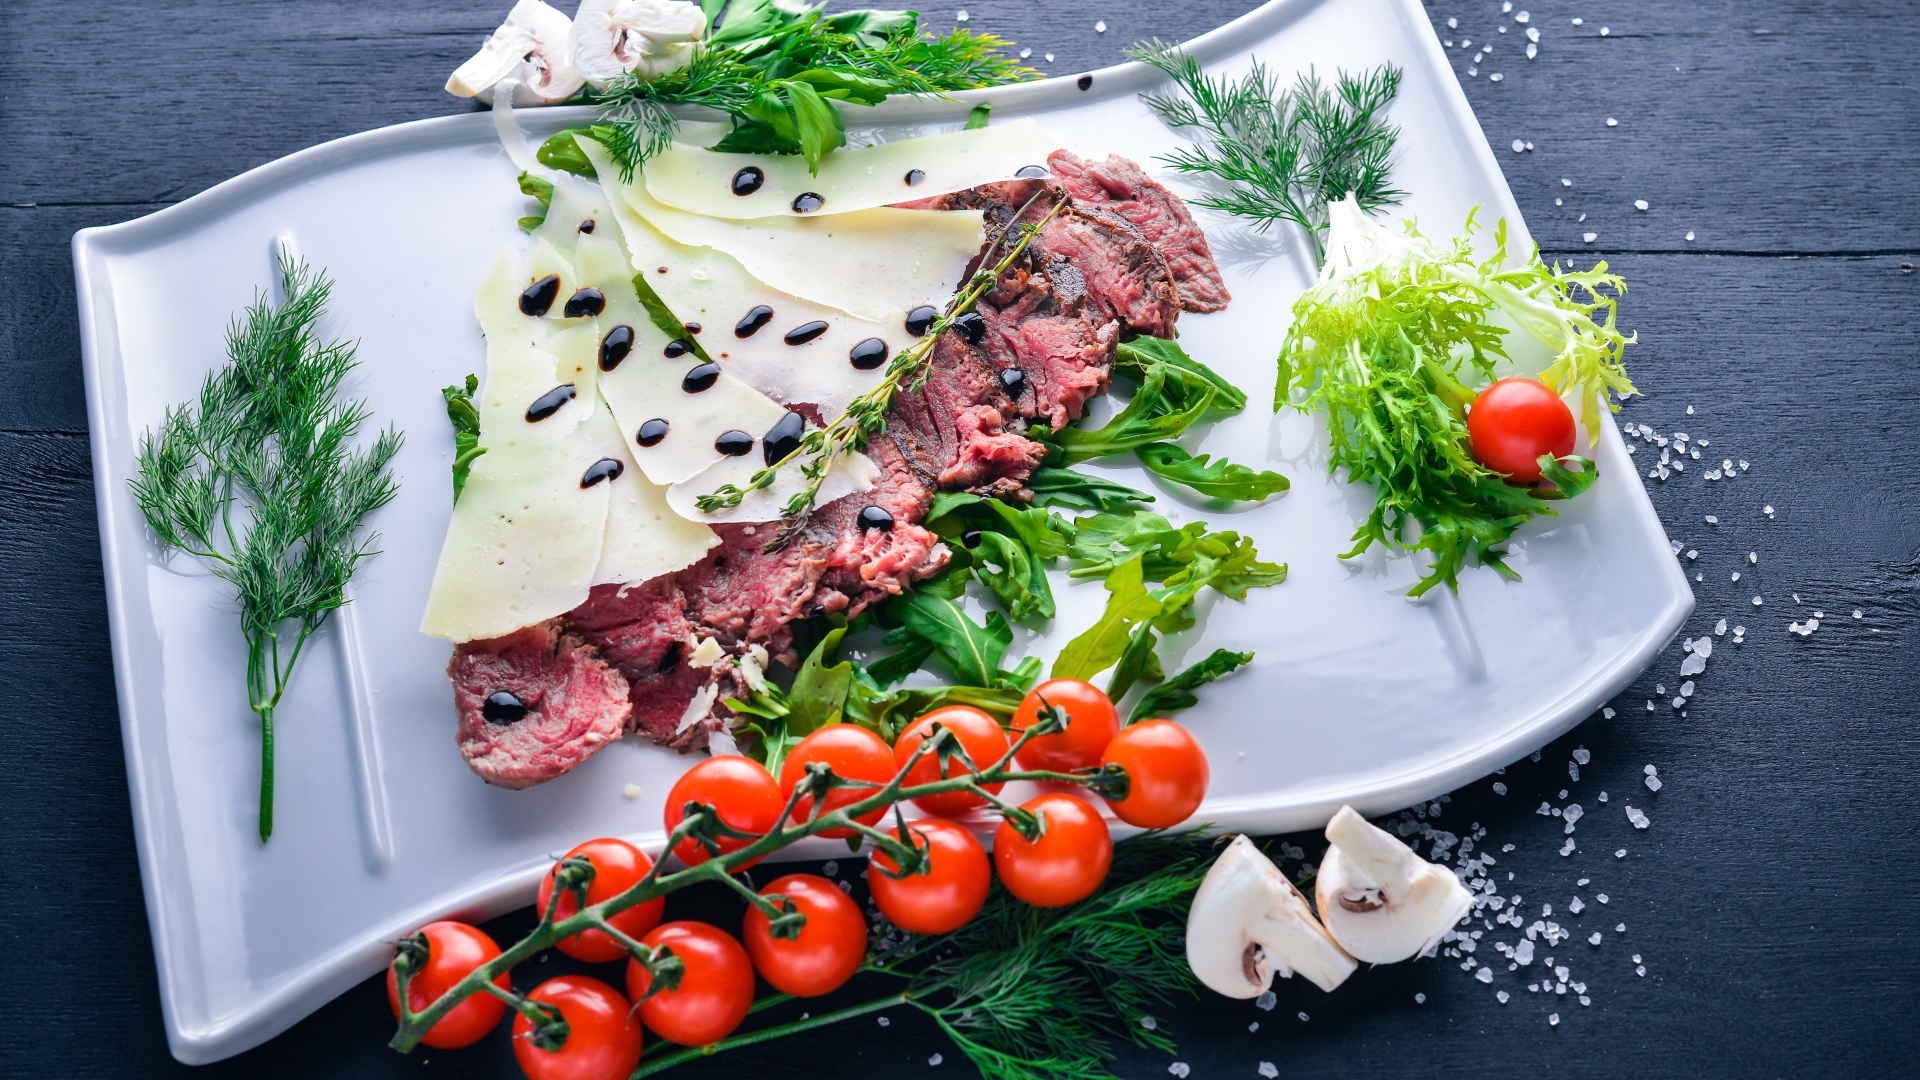 Meat with cheese, vegetables and herbs on a plate